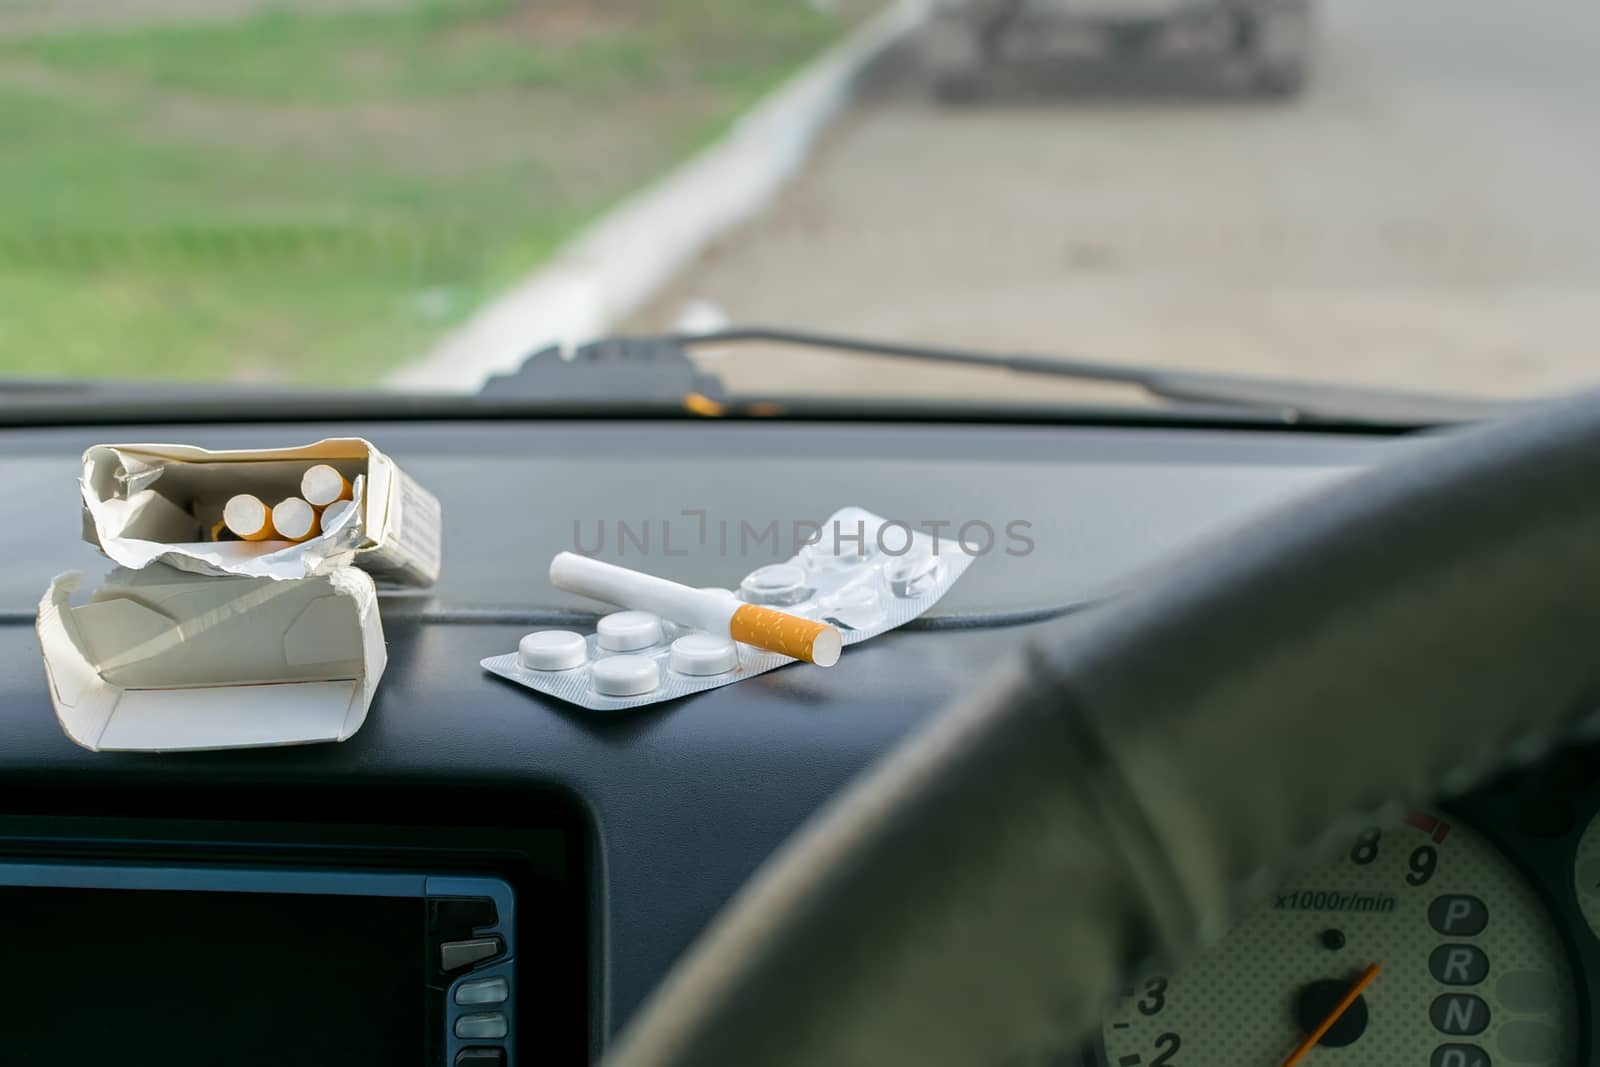 on the panel of the vehicle are cigarettes and pack of pills